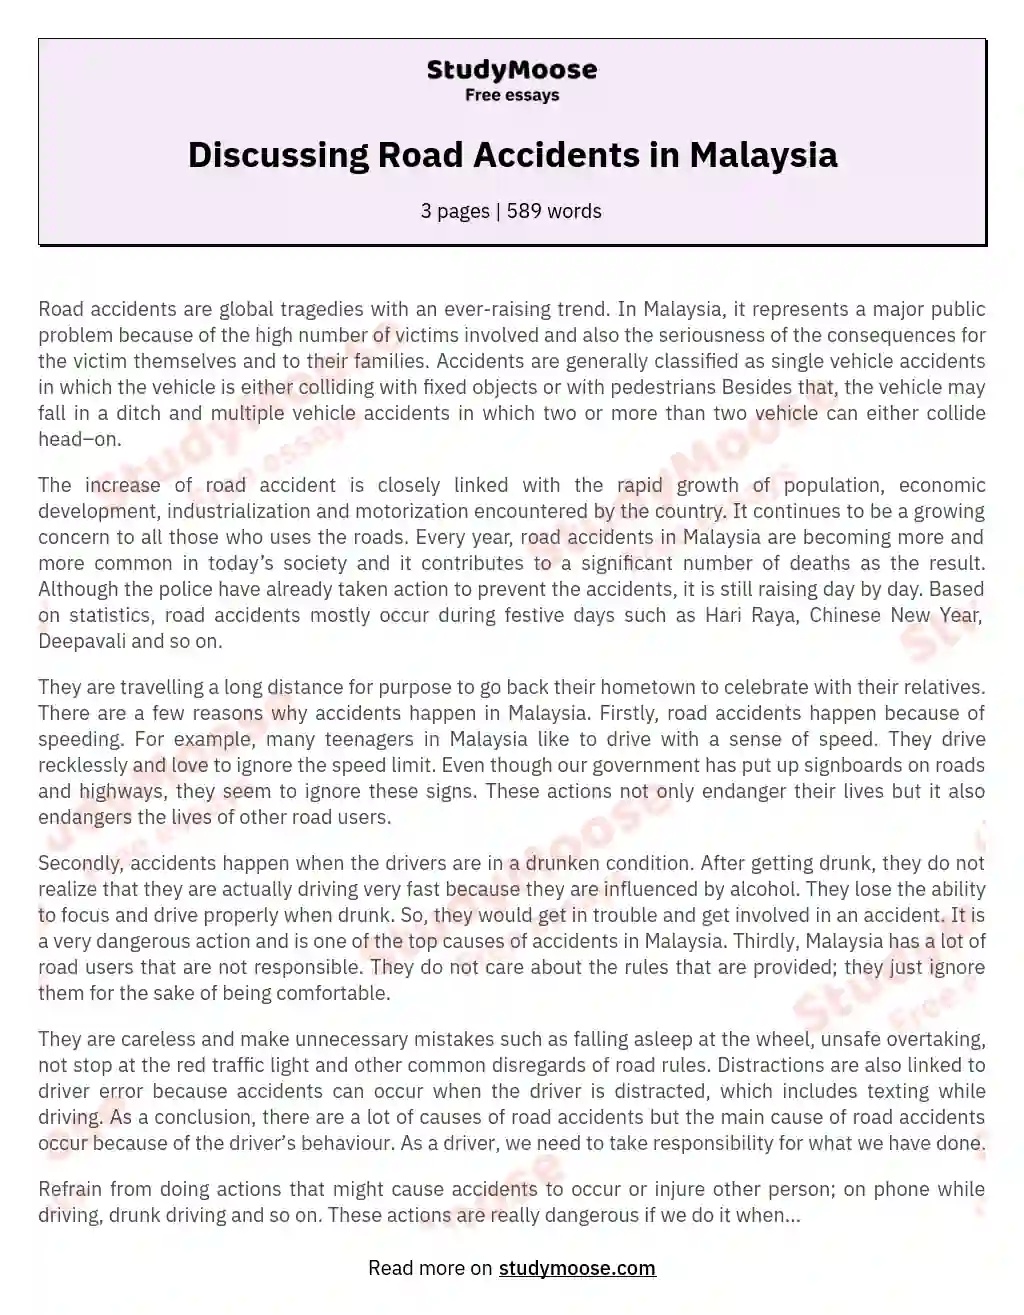 Discussing Road Accidents in Malaysia Free Essay Example